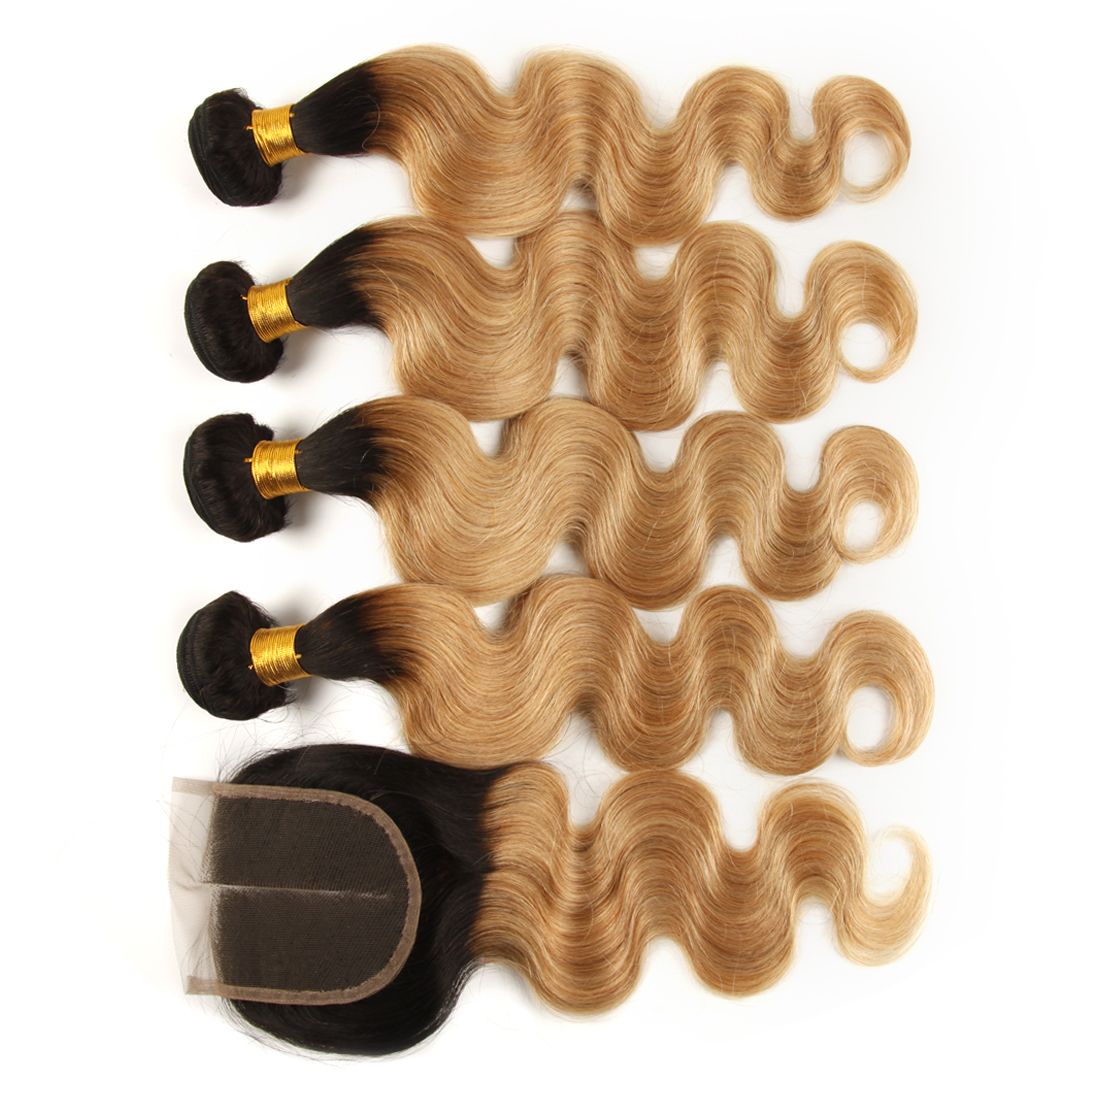 Single donor hair wholesale human hair extension,24 inch brazilian remy curly human hair extensions,brown hair